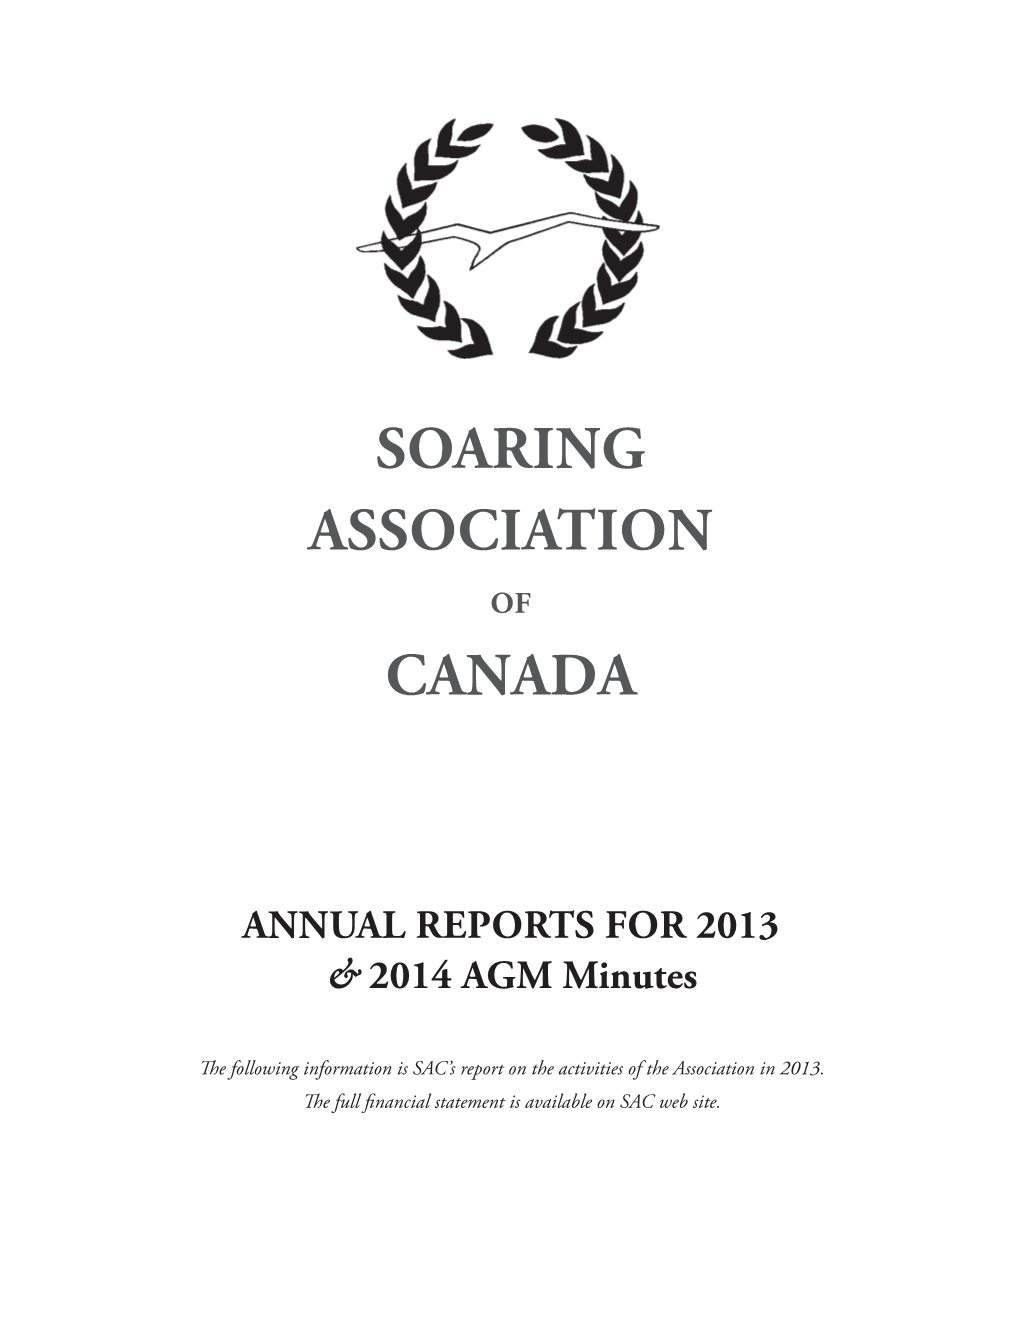 Soaring Association of Canada Annual Reports for 2013